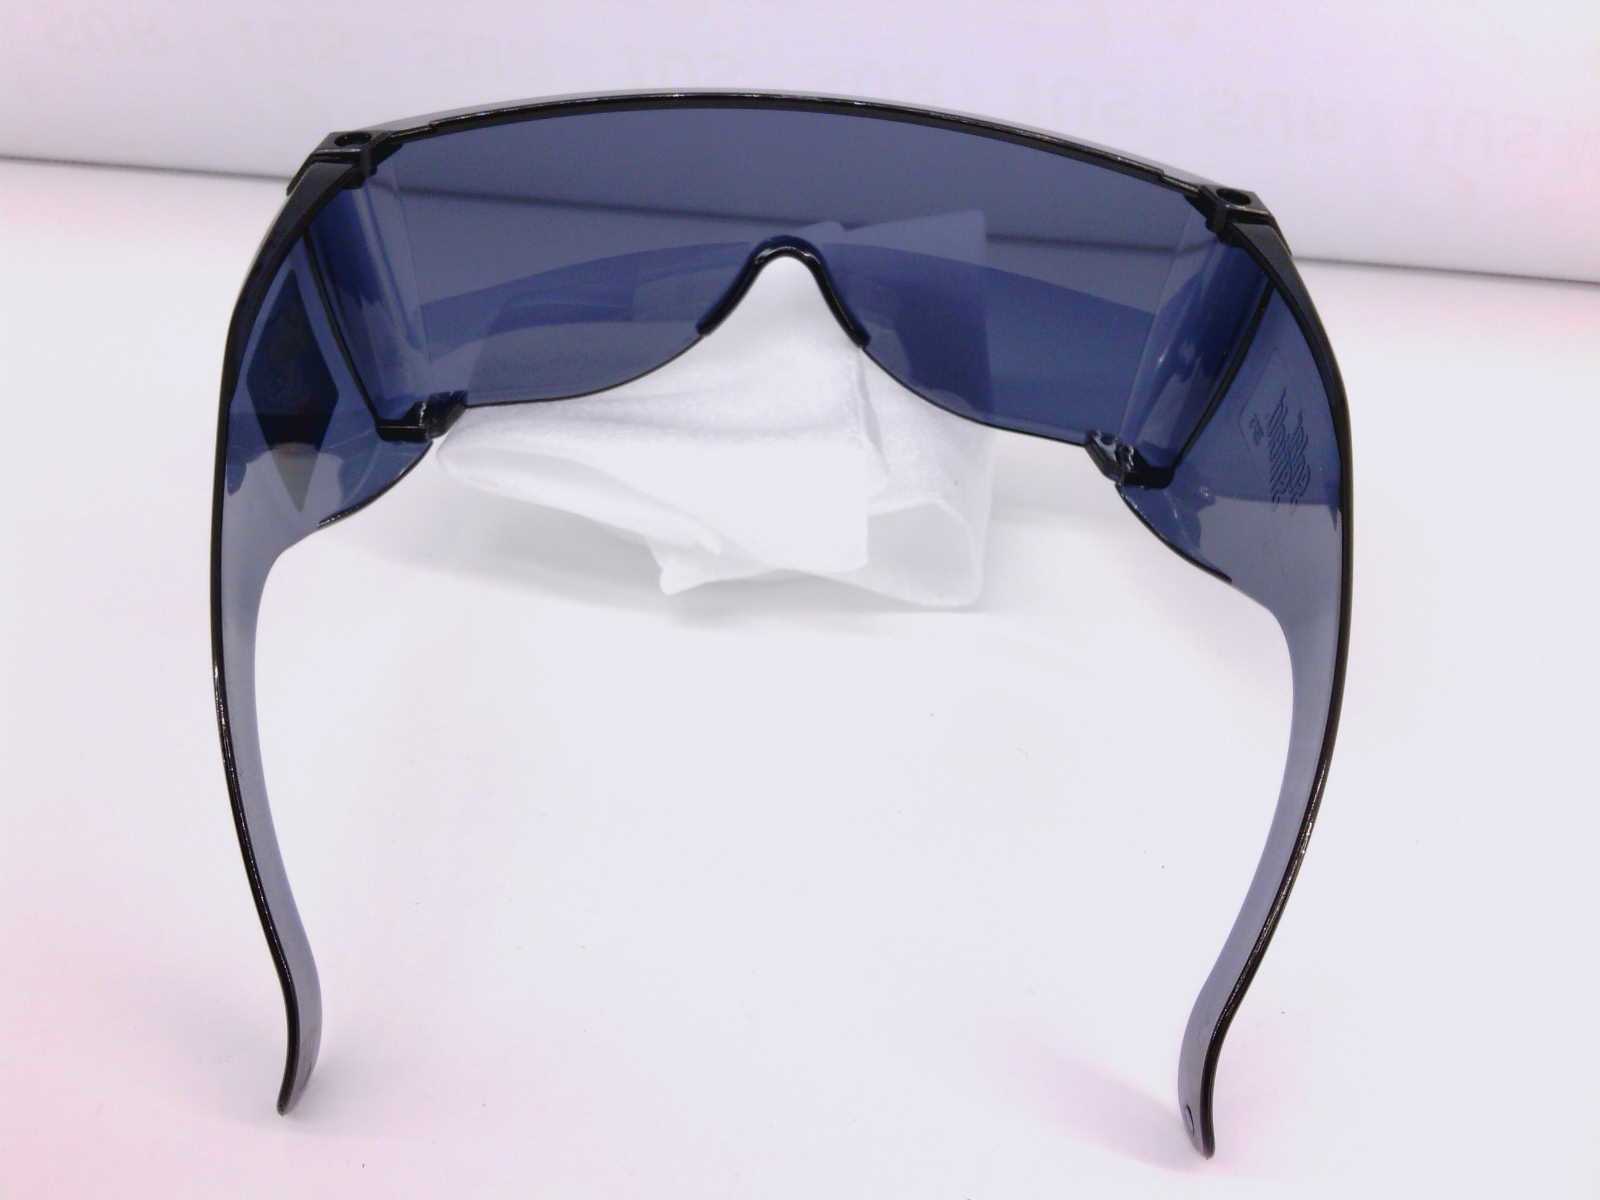 Wrap Around Black Dark Tinted Solar Shield Fits Over Safety Z872 Sunglasses Protection 